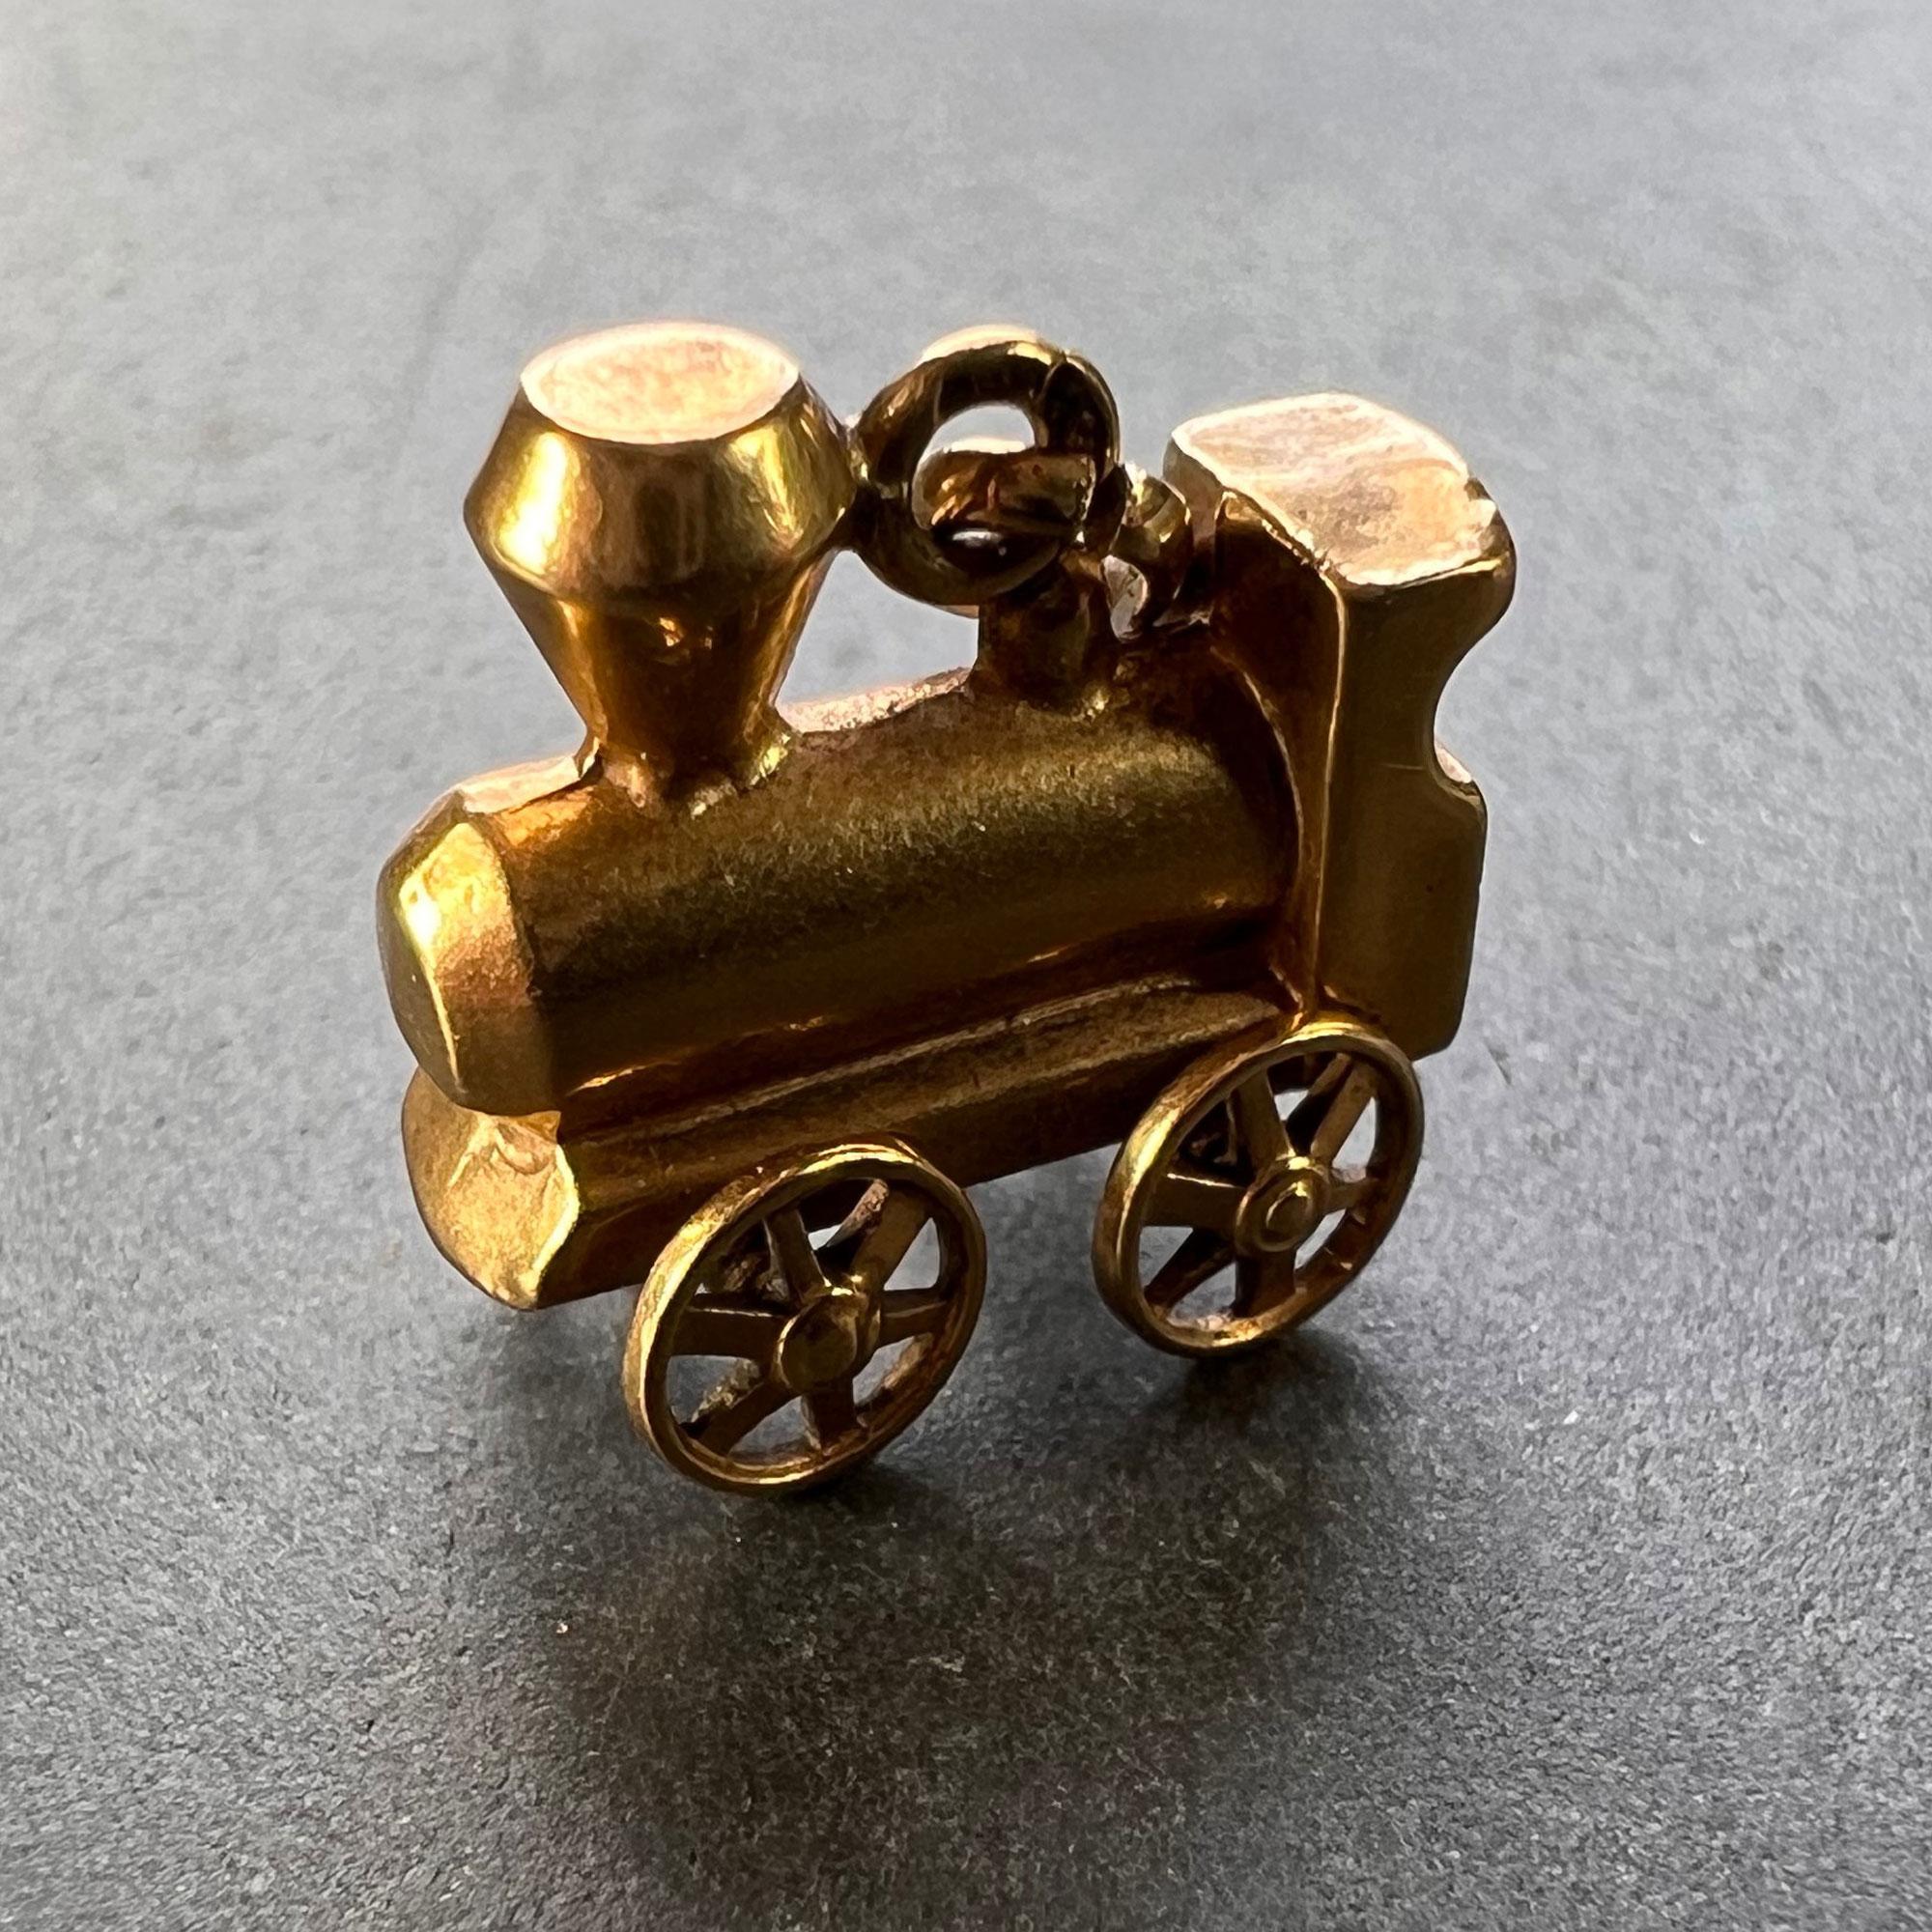 A French 18 karat (18K) yellow gold mechanical charm pendant designed as the engine of a steam train with moving wheels. Stamped with the eagle's head for French manufacture and 18 karat gold with an unknown maker's mark.

Dimensions: 1.3 x 1.3 x